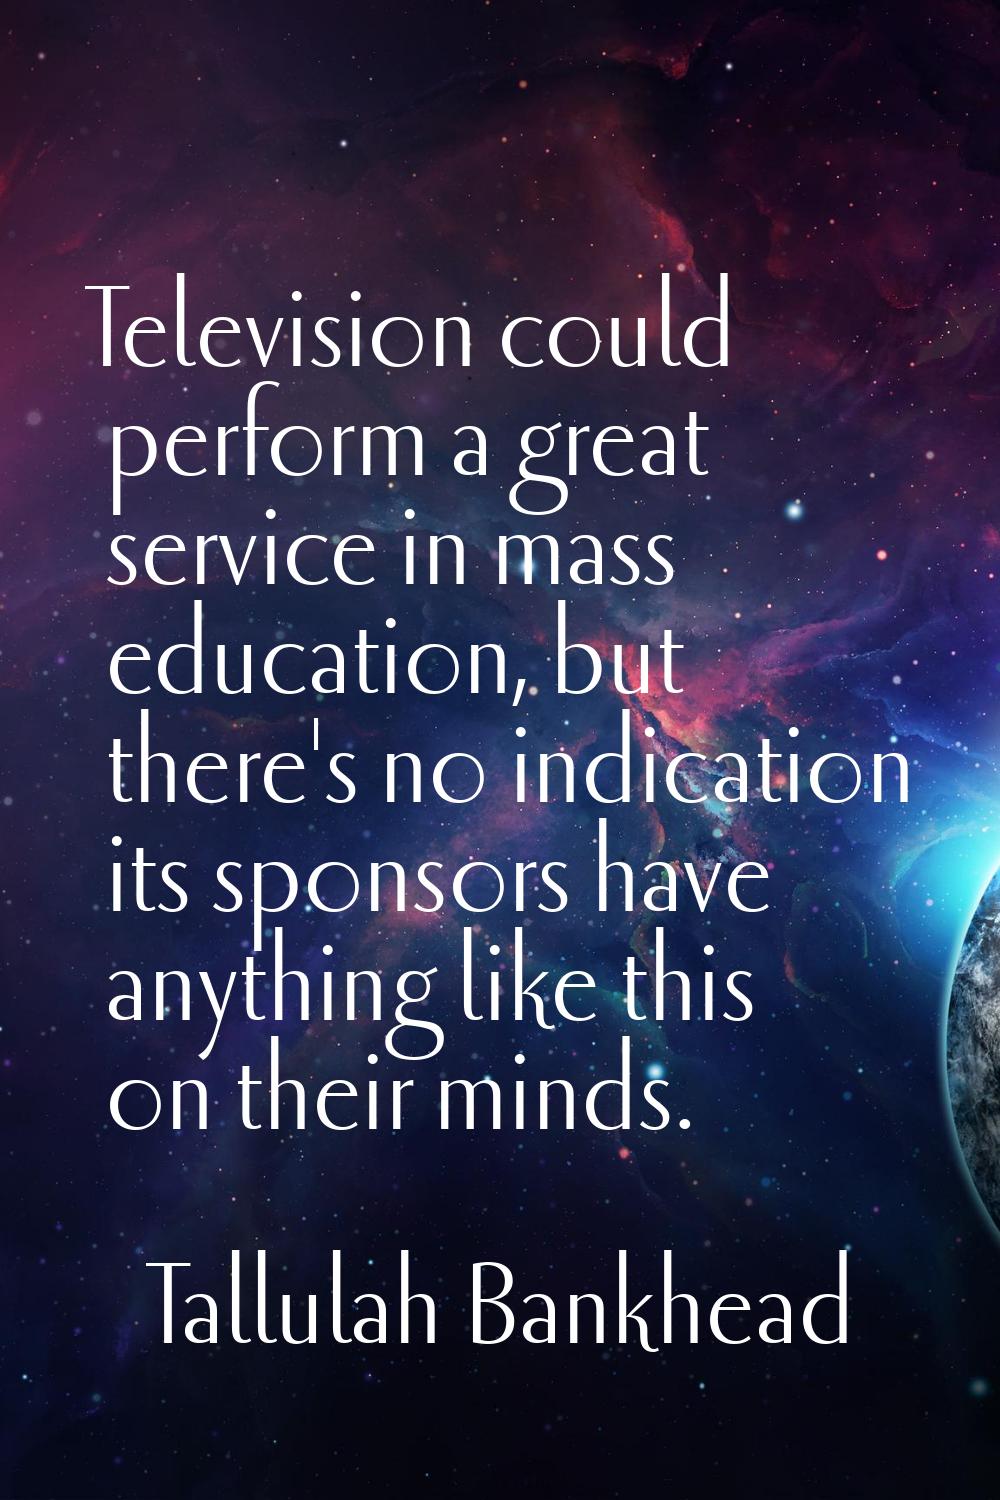 Television could perform a great service in mass education, but there's no indication its sponsors 